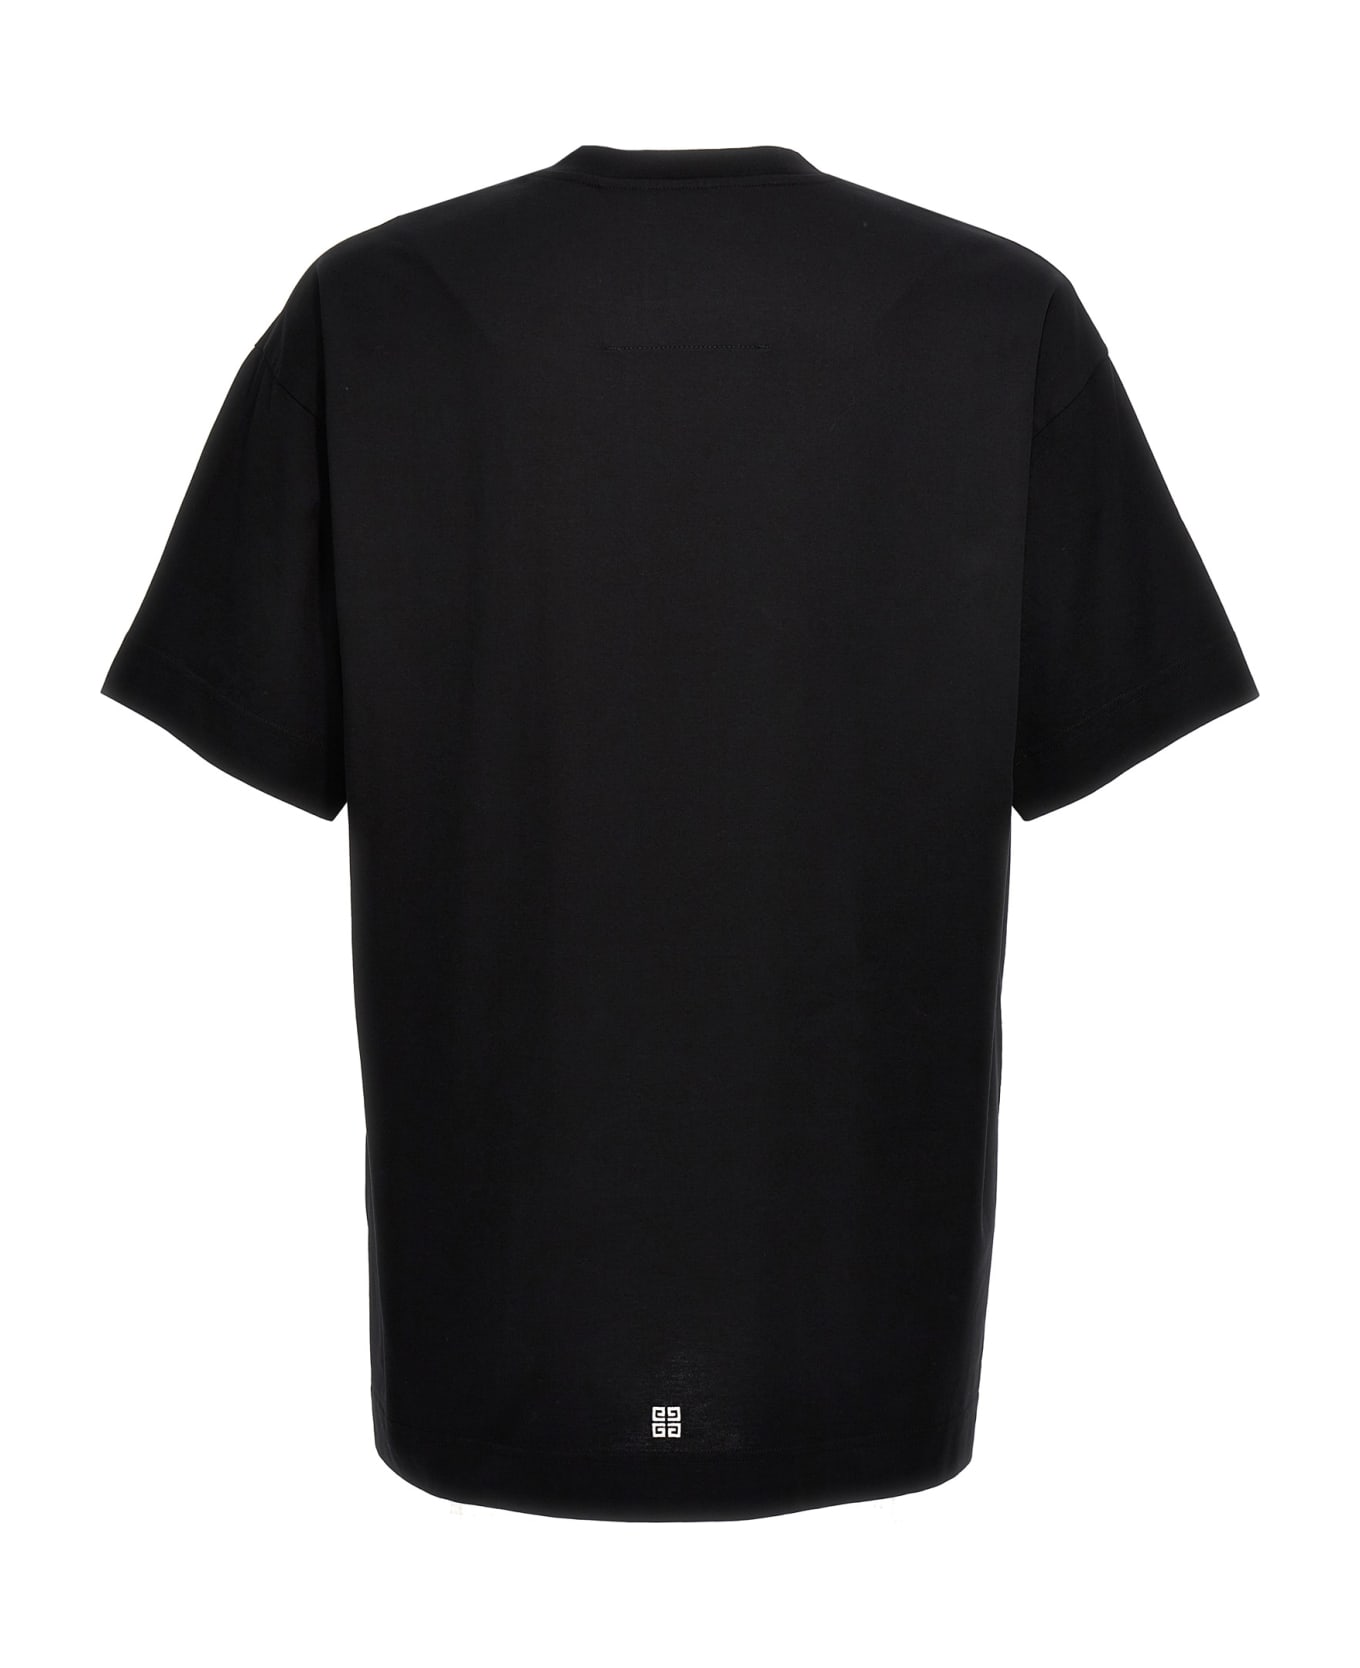 Givenchy Logo Embroidery T-shirt - Black シャツ